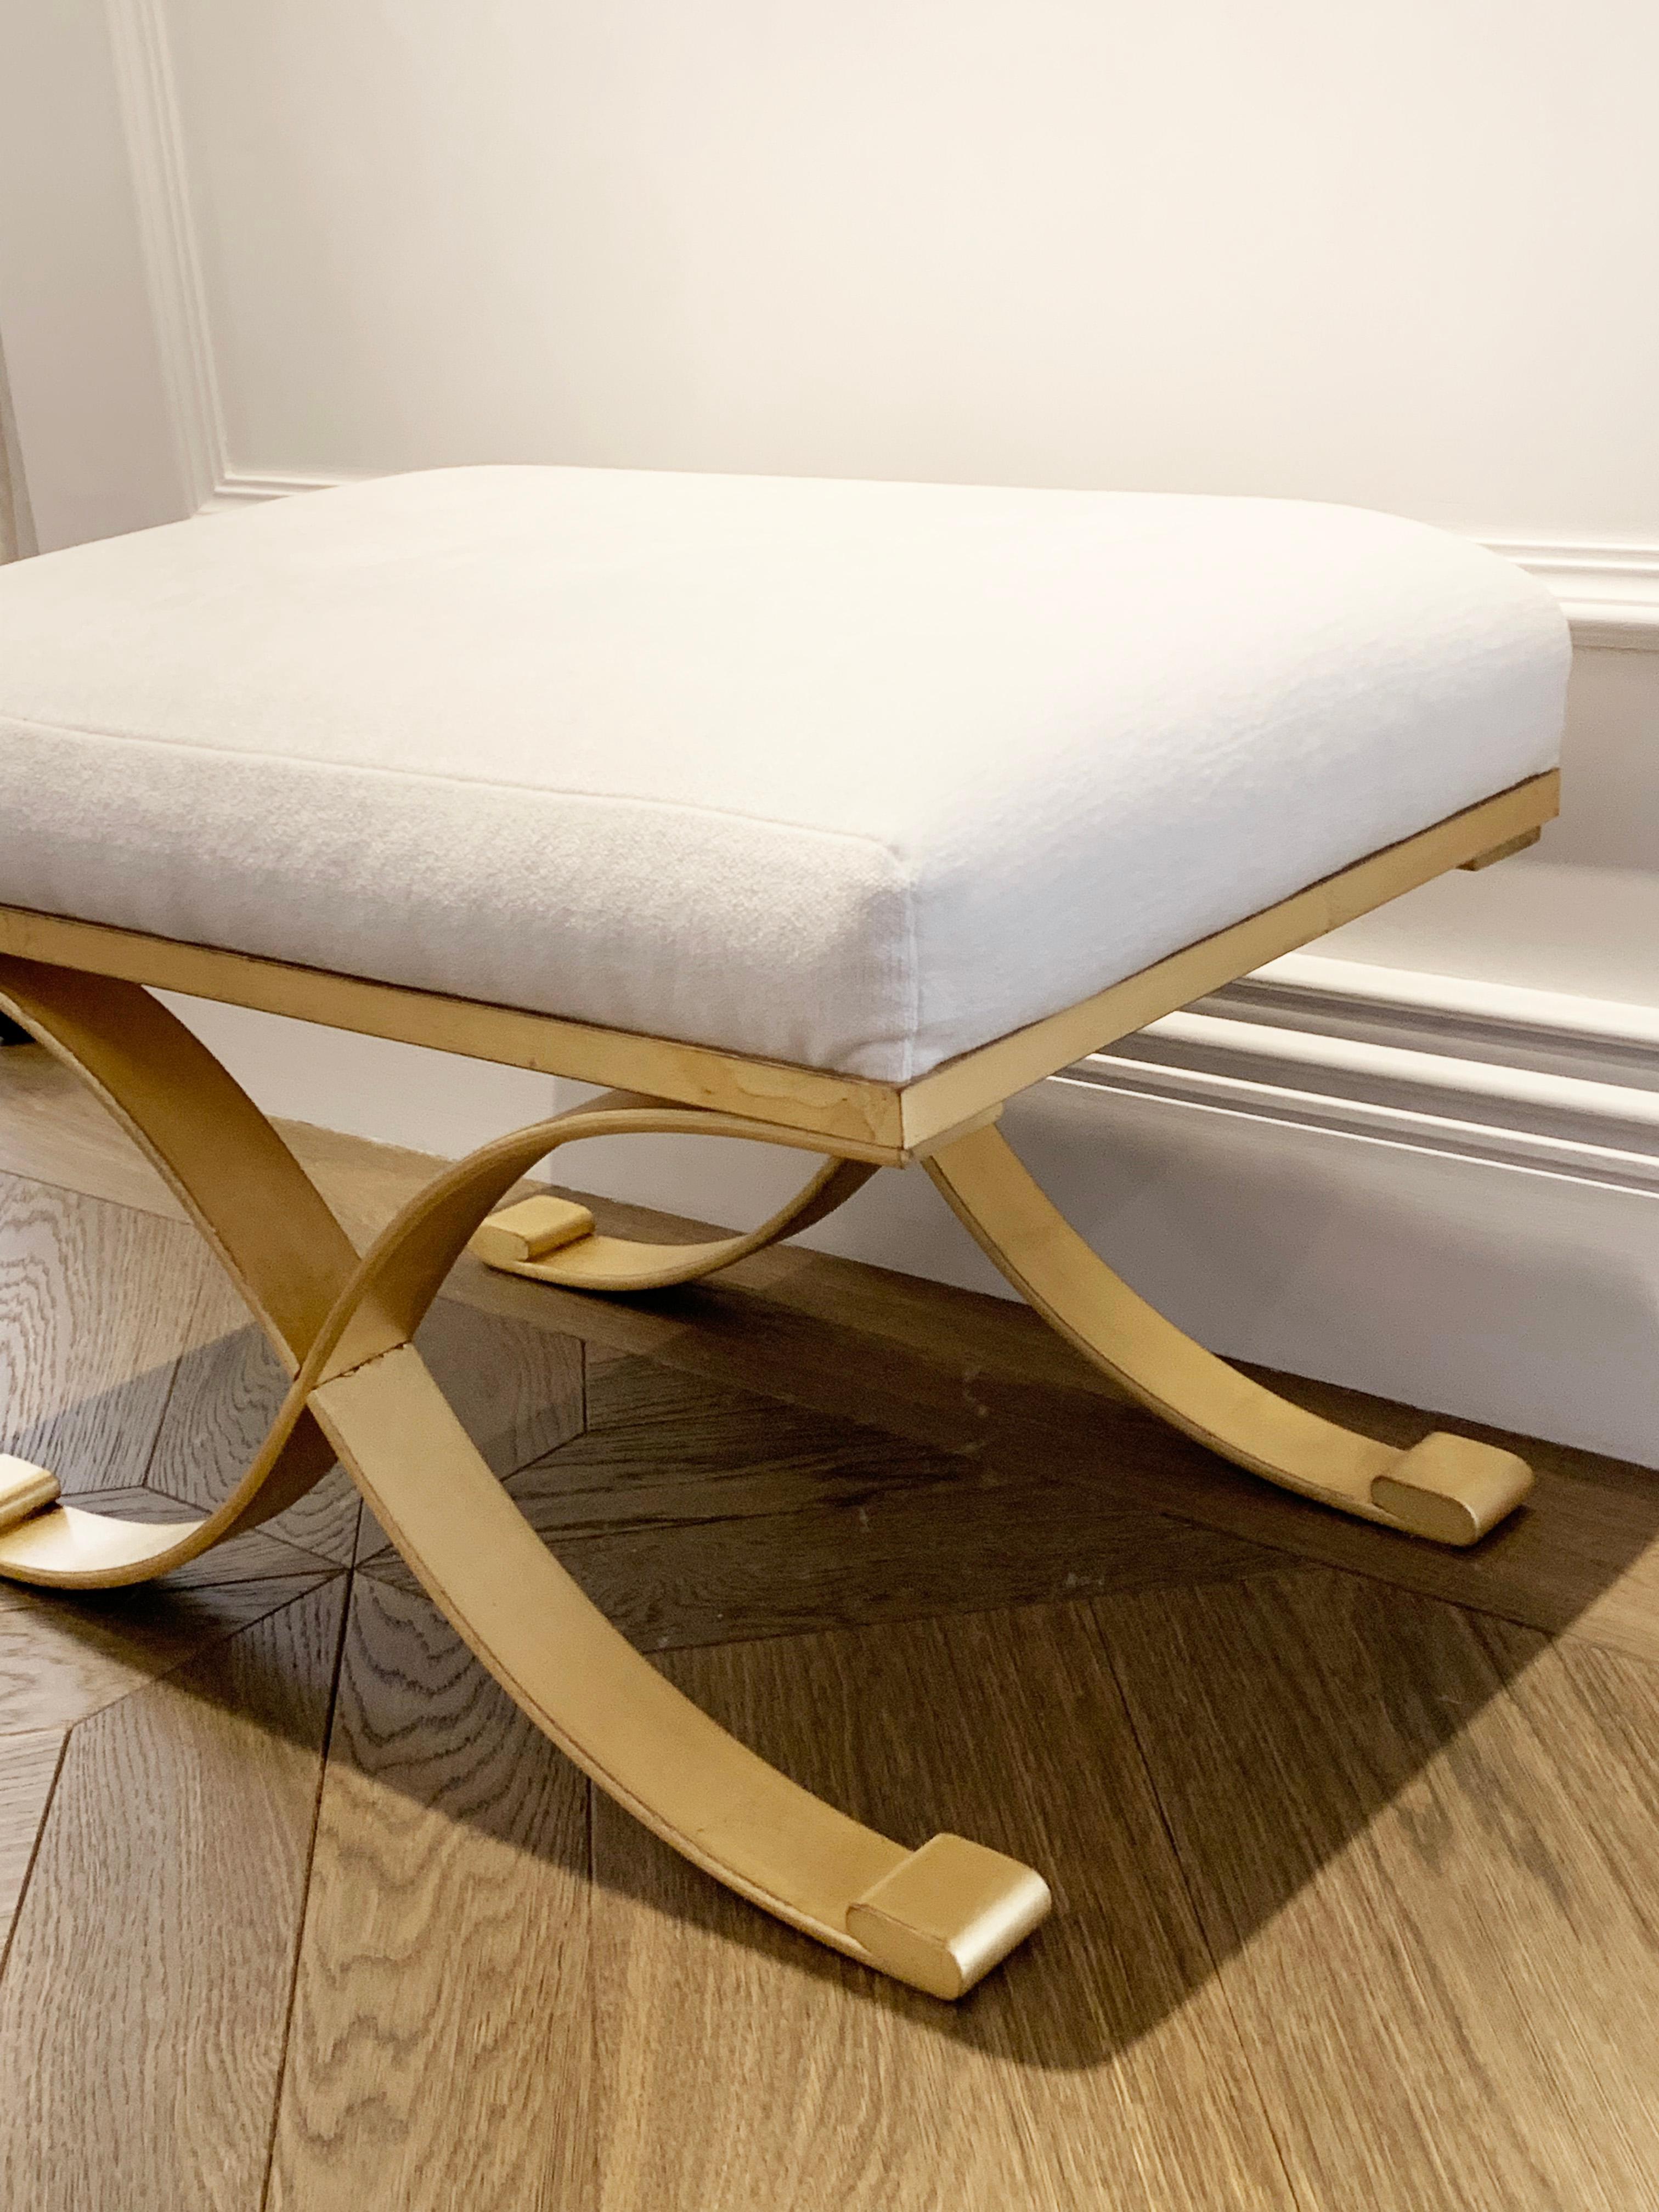 Add a touch of Neo-Classical style elegance to your room with the gilded wrought iron stool, expertly handcrafted by the renowned French metalworkers Pouenat, France. 

This stool is created in the style of the revered French metalworker Raymond